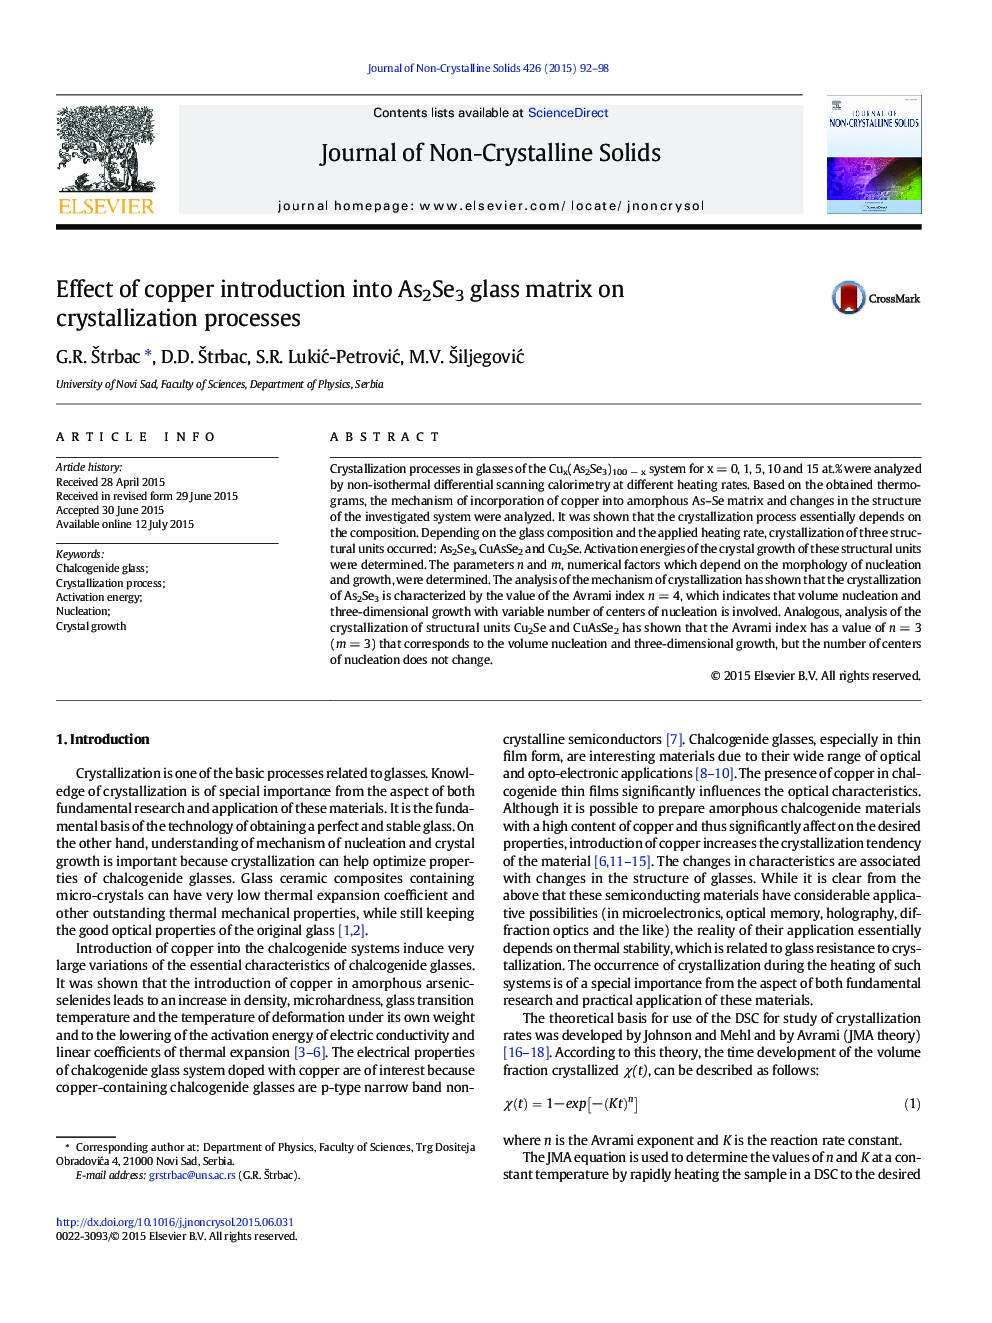 Effect of copper introduction into As2Se3 glass matrix on crystallization processes